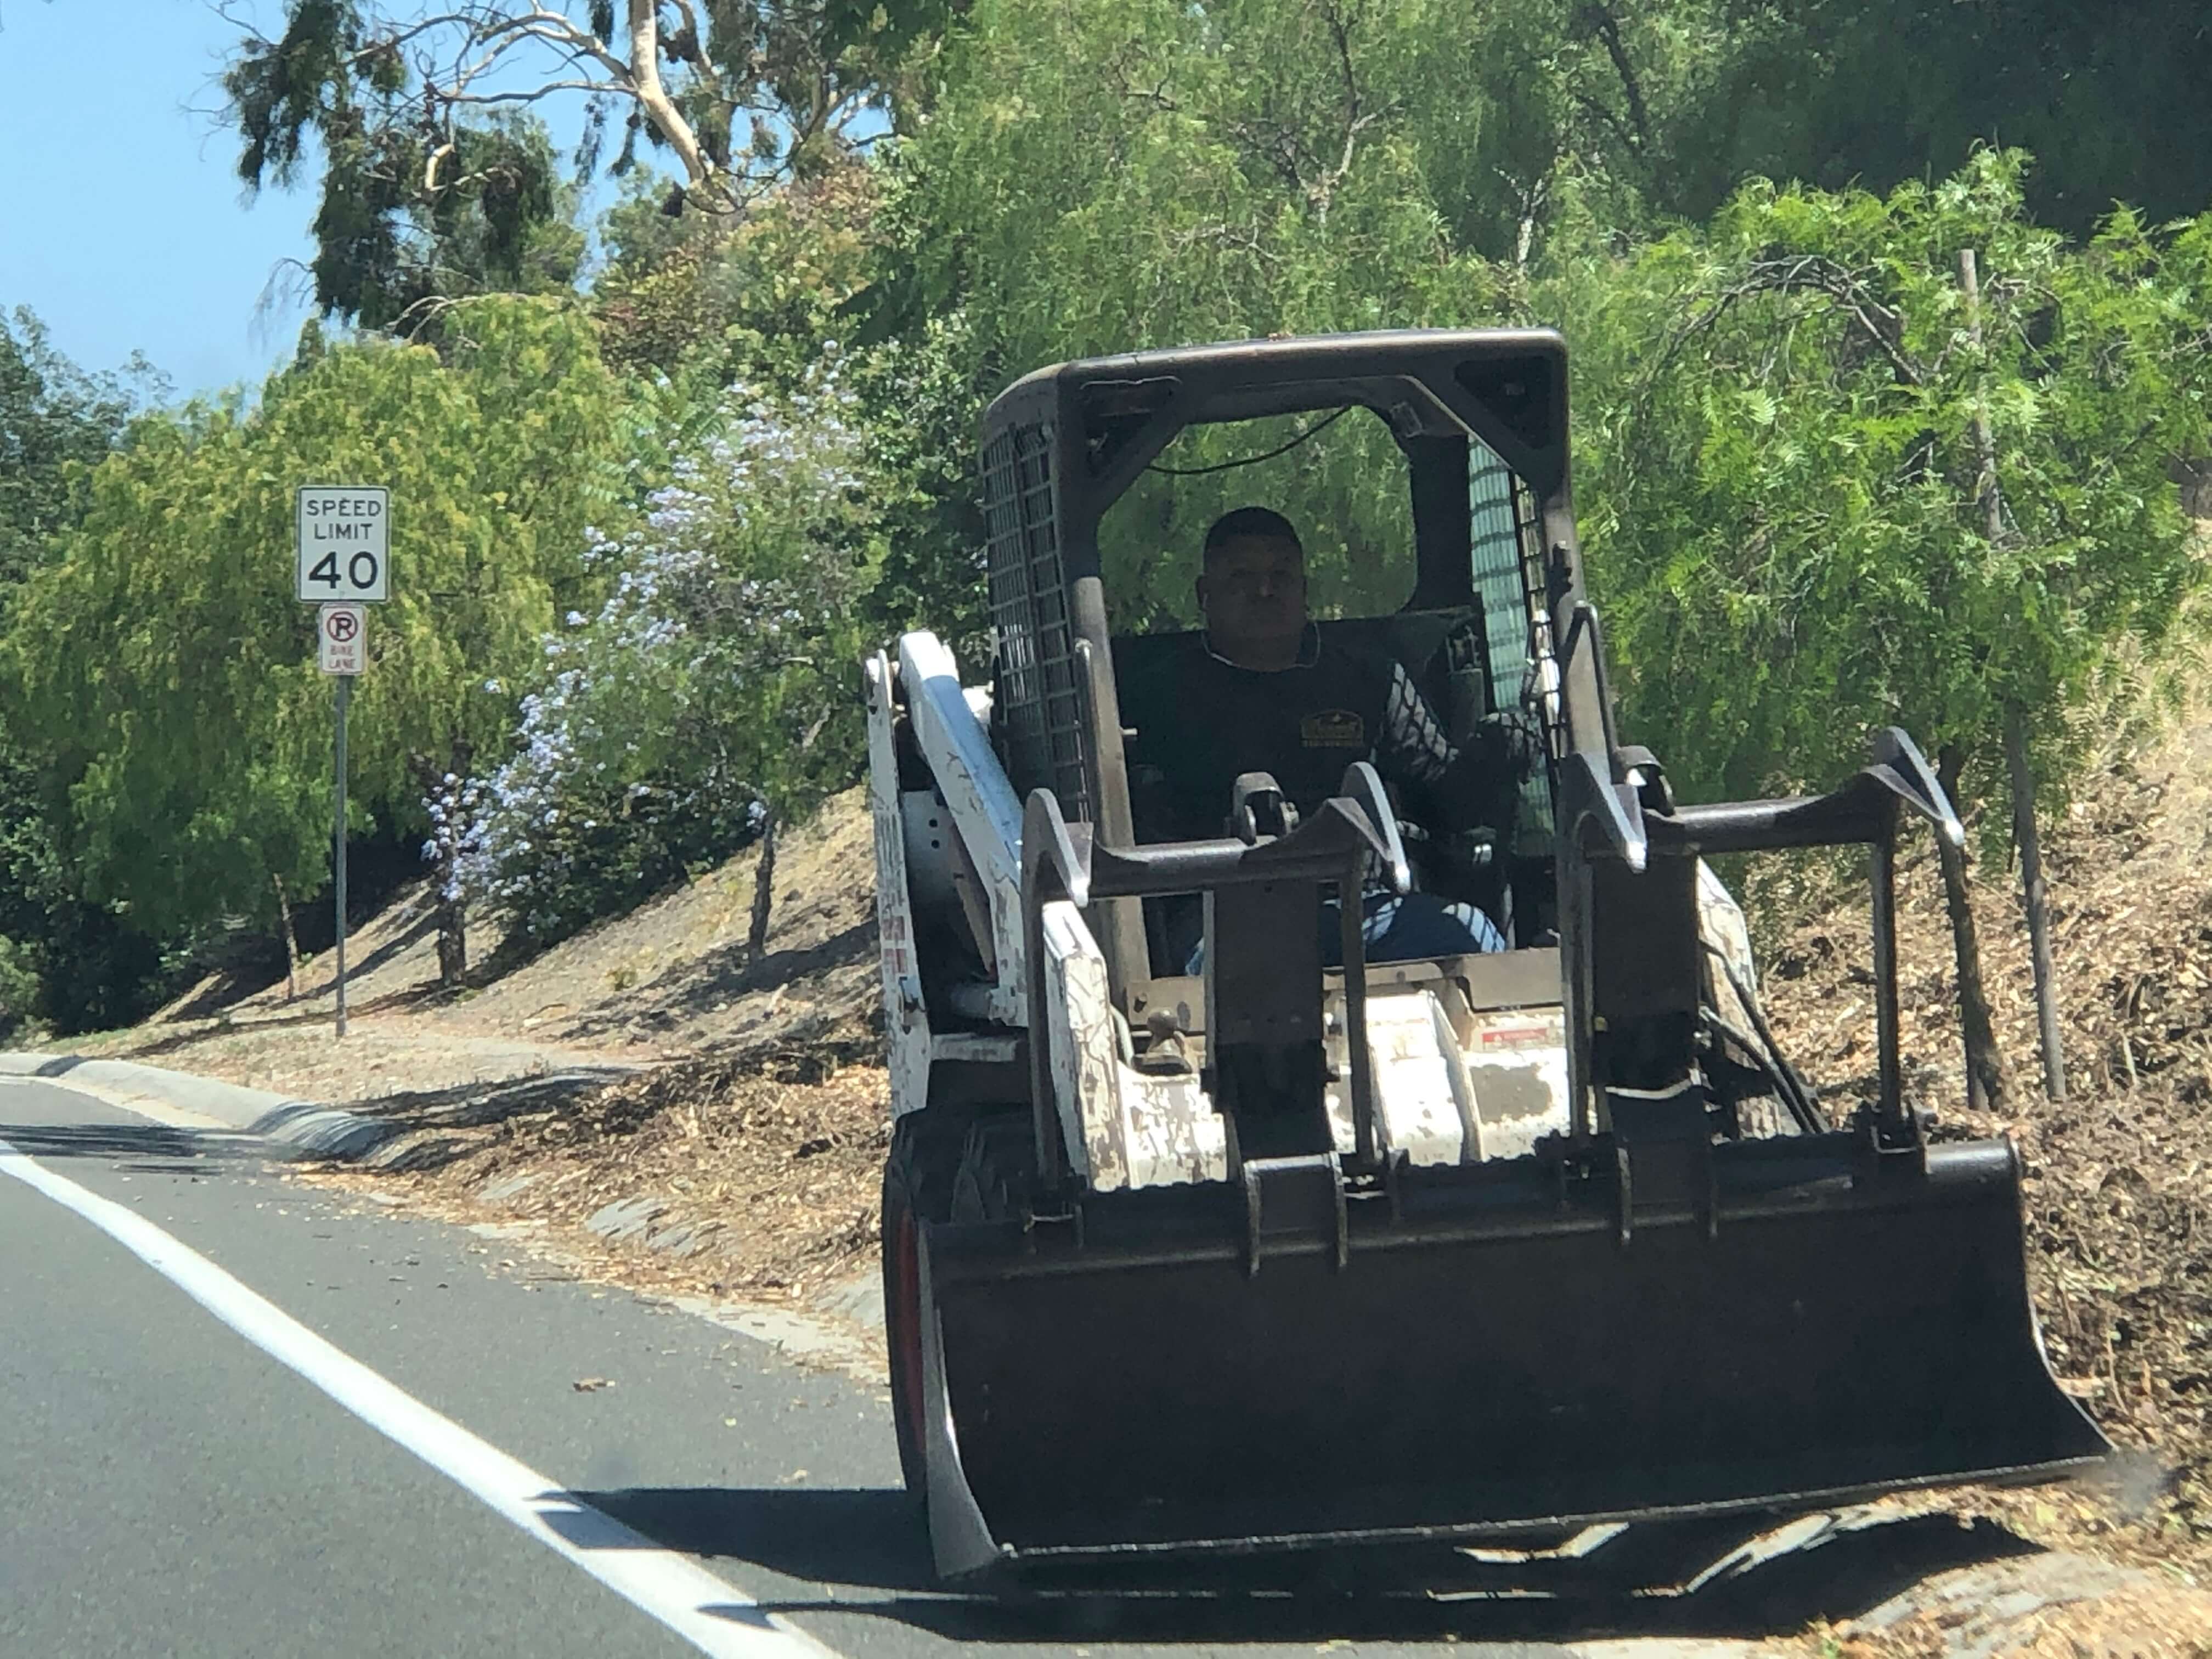 Bobcat earth mover during roadside work in Los Angeles, CA.